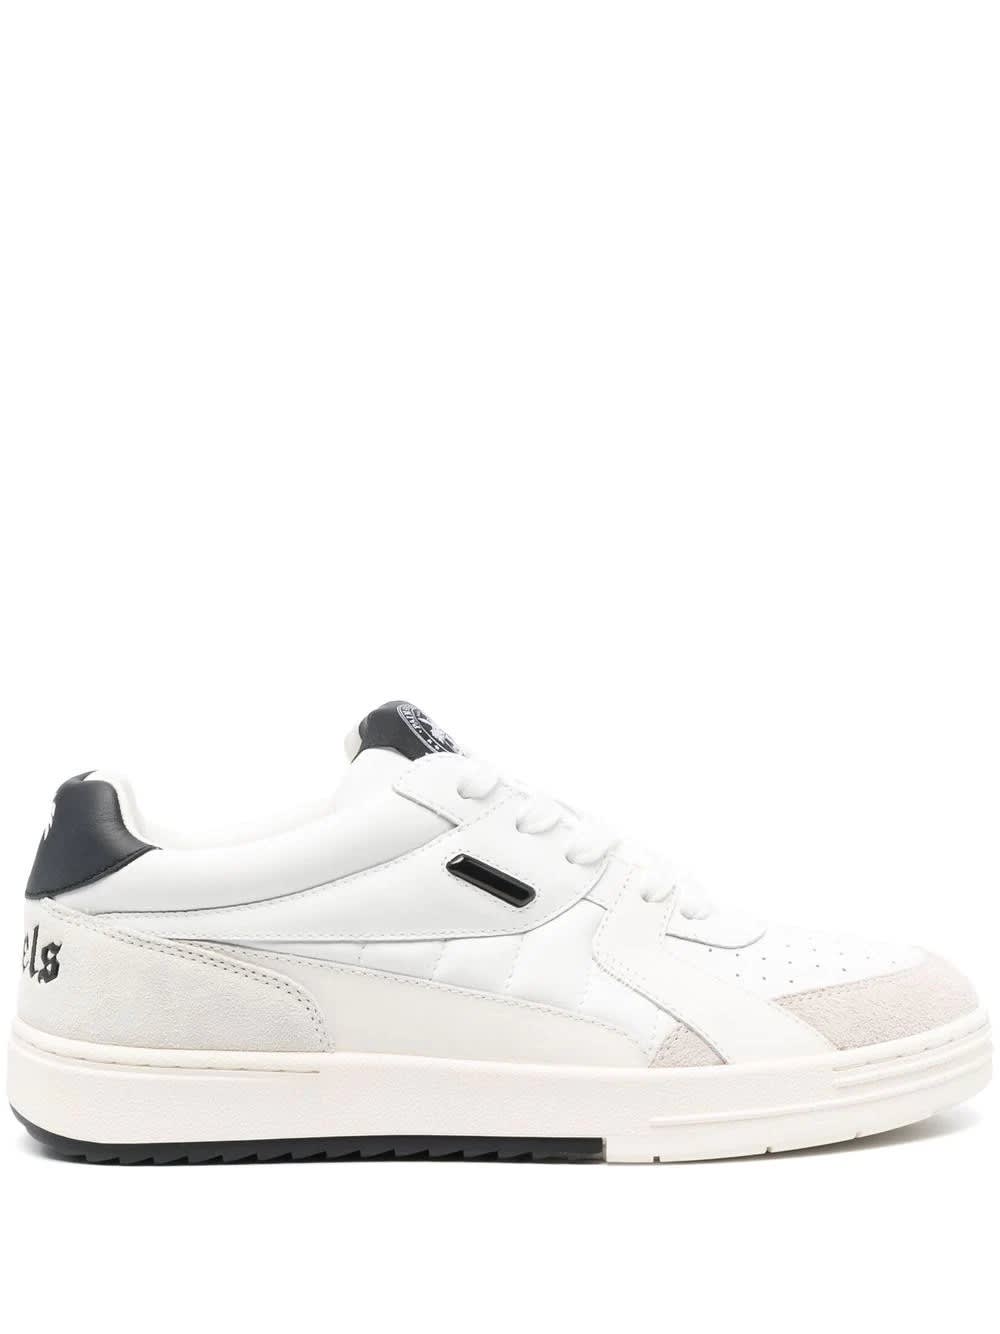 PALM ANGELS WHITE AND BLACK UNIVERSITY LOW SNEAKERS